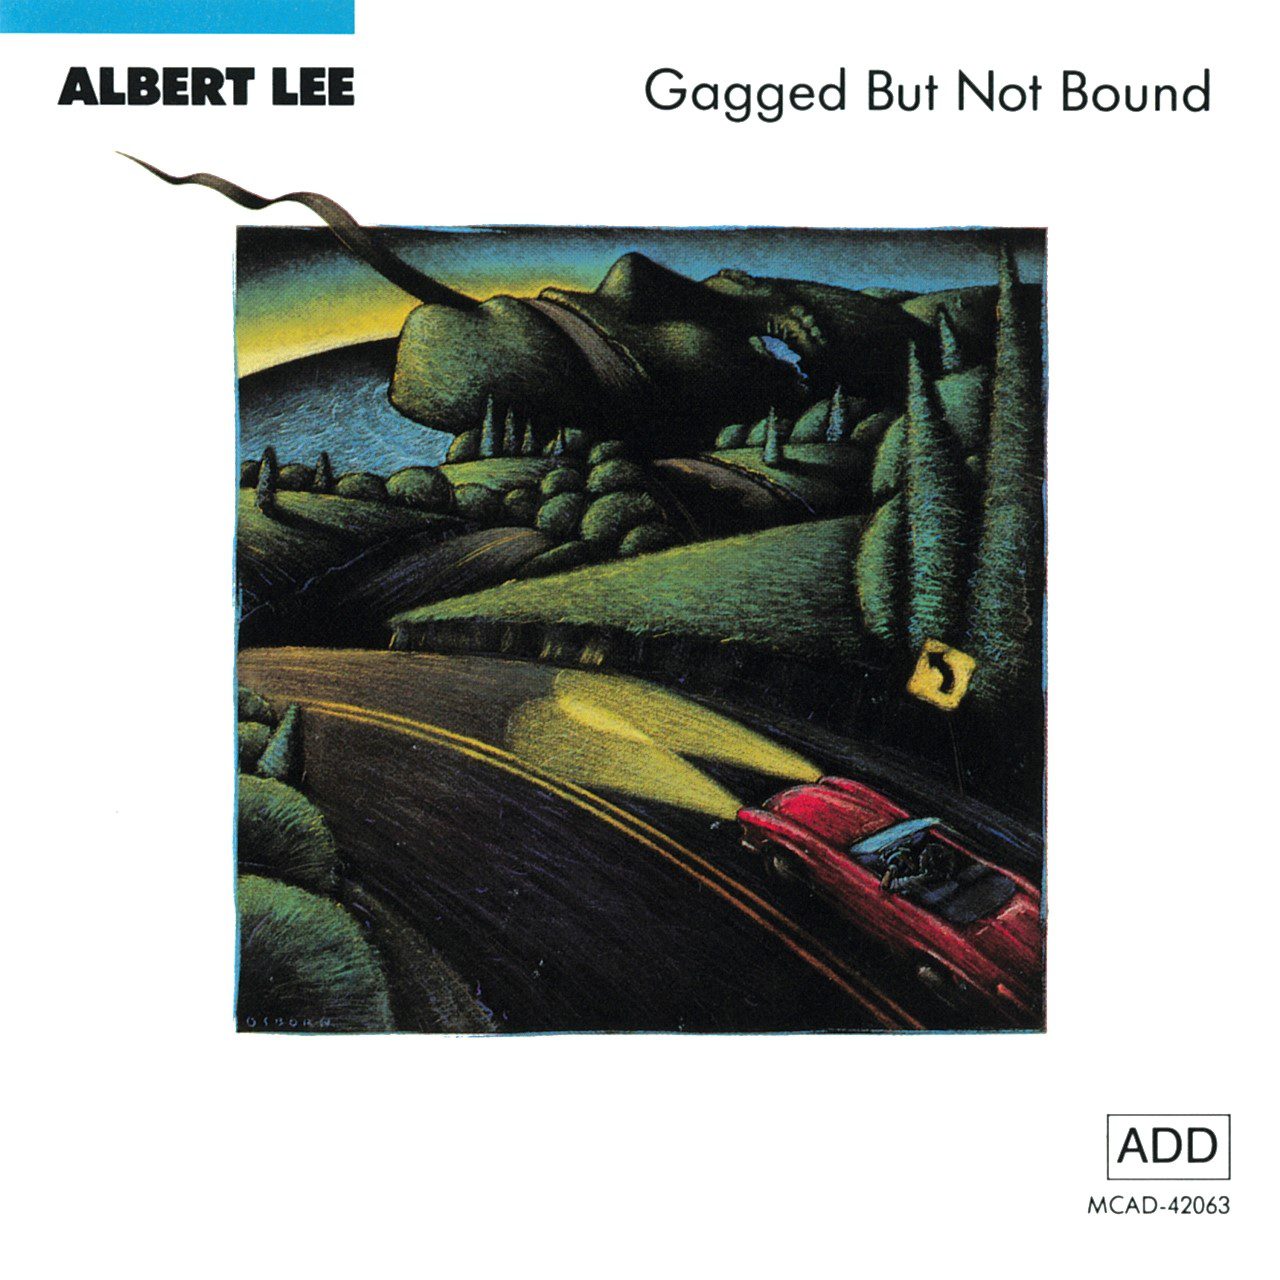 Albert Lee - Gagged But Not Bound cover album